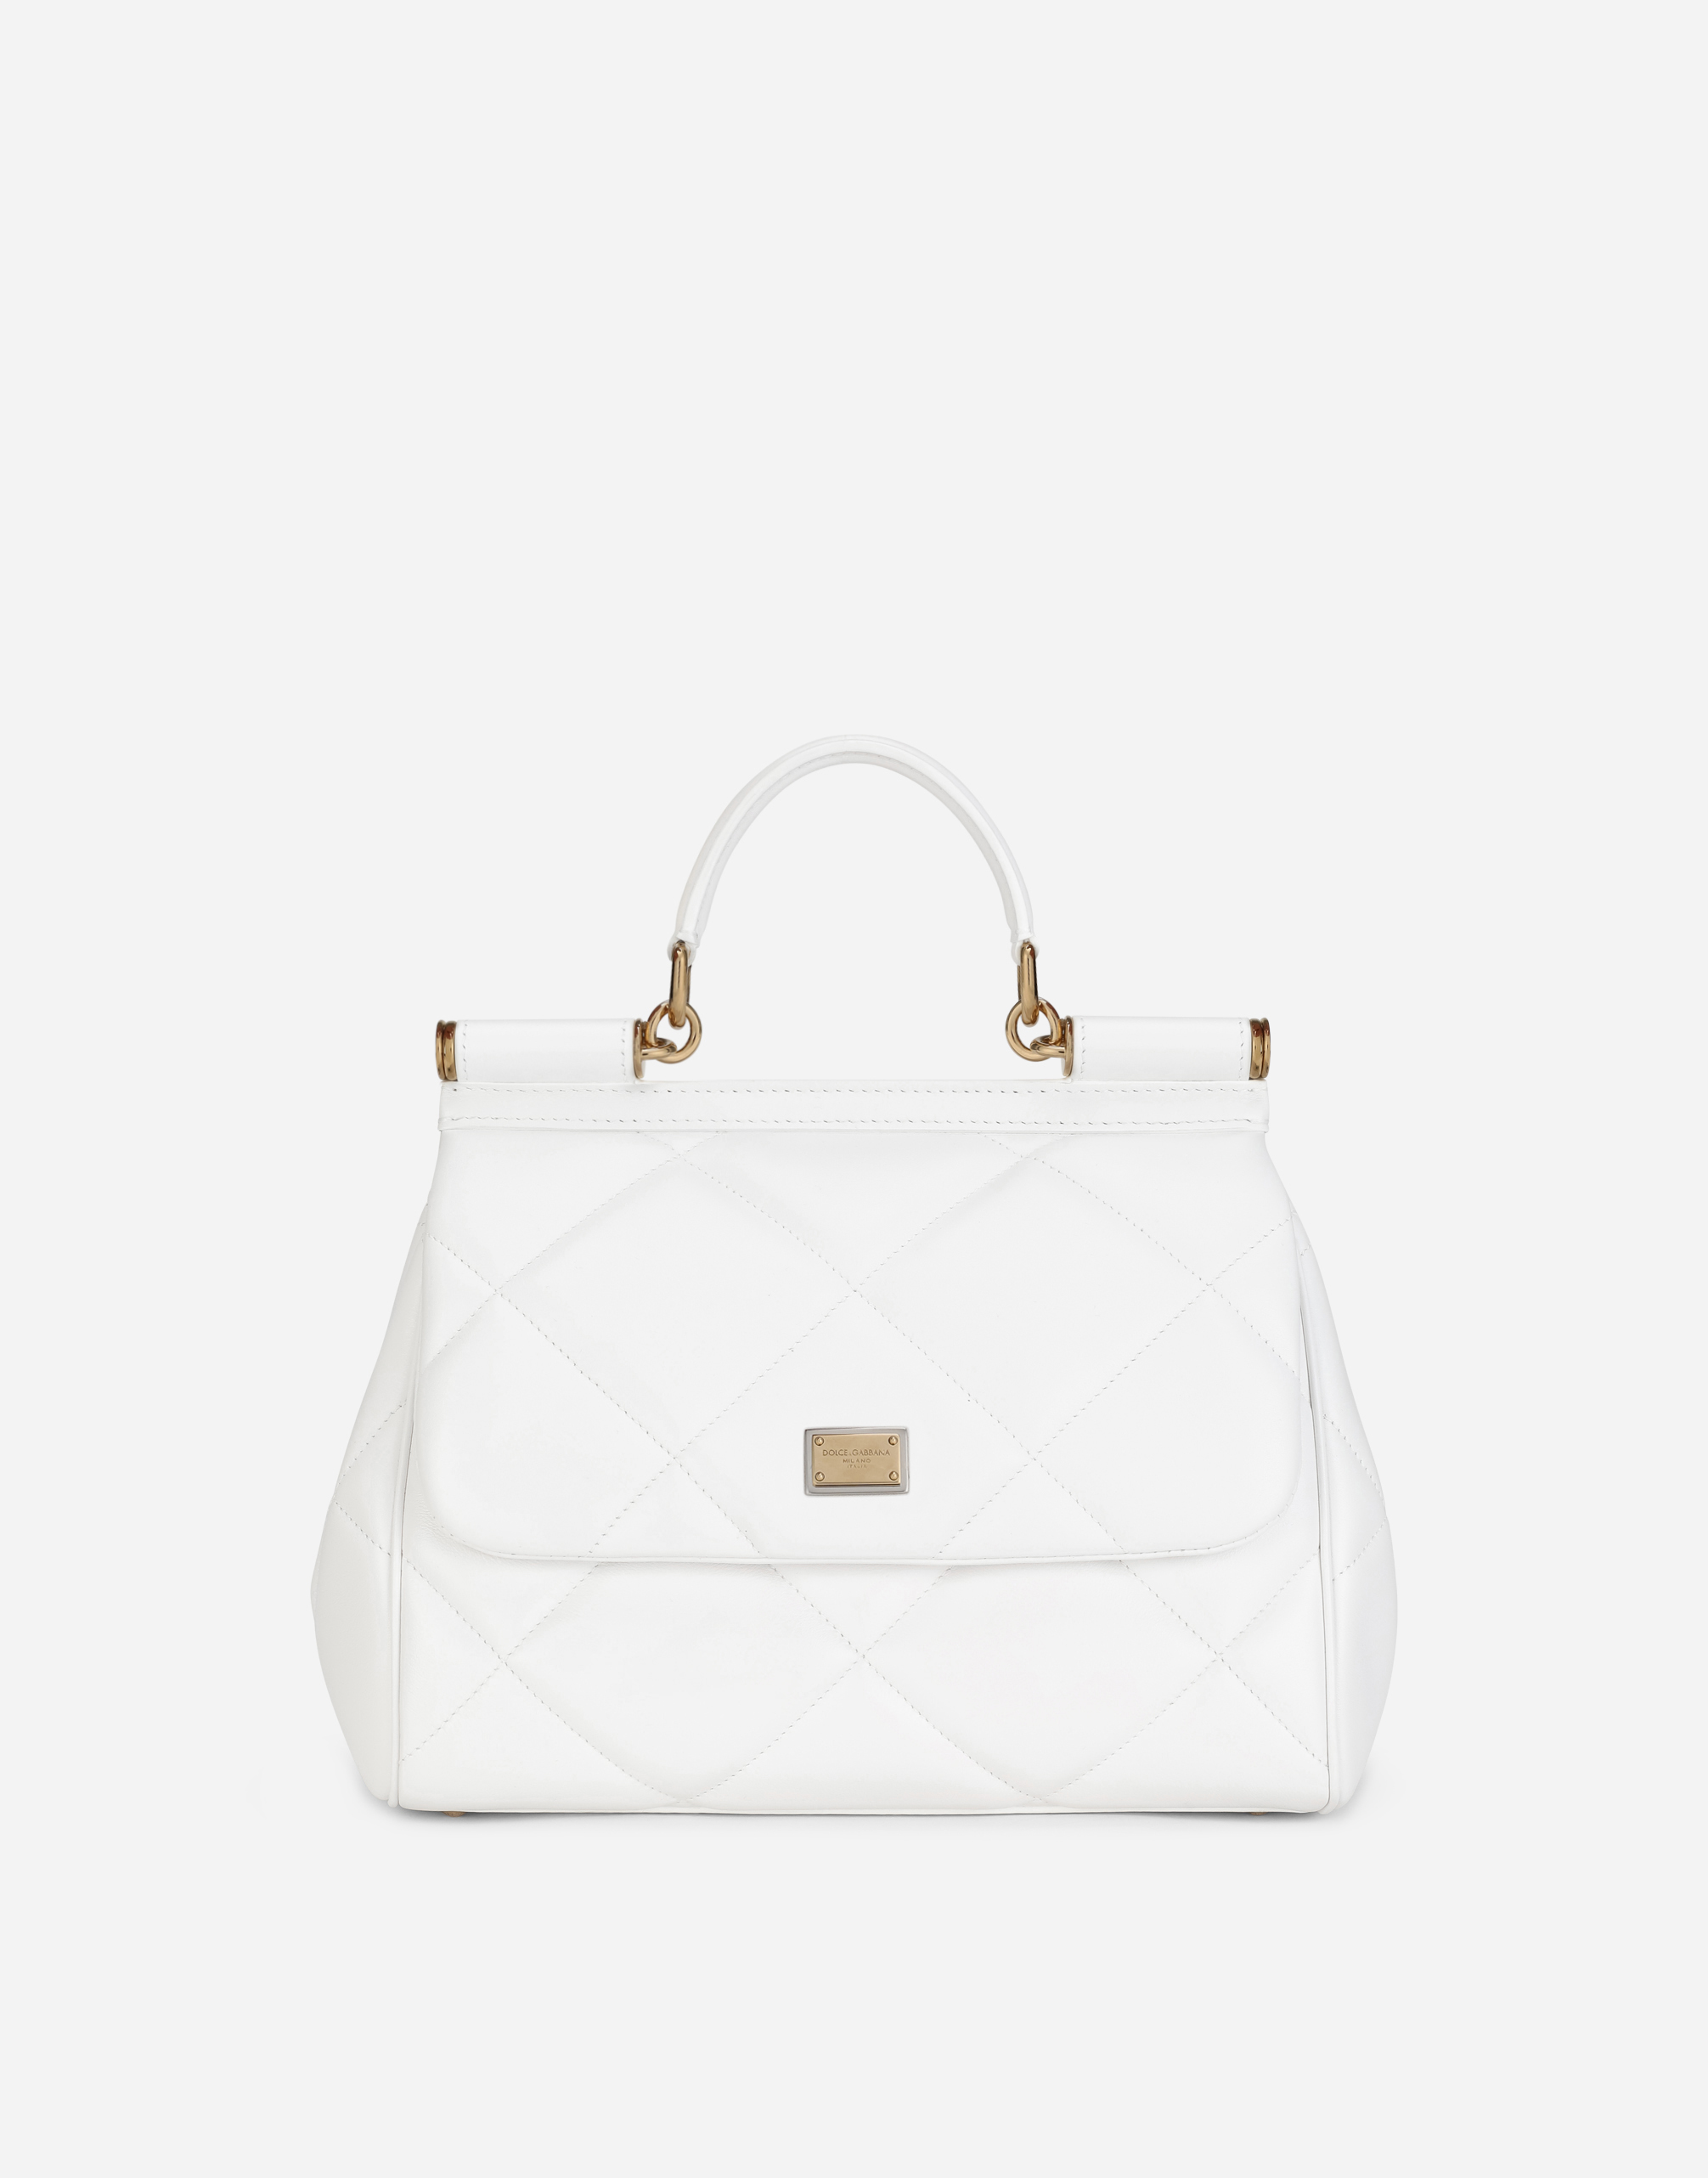 Medium Sicily bag in quilted calfskin in White